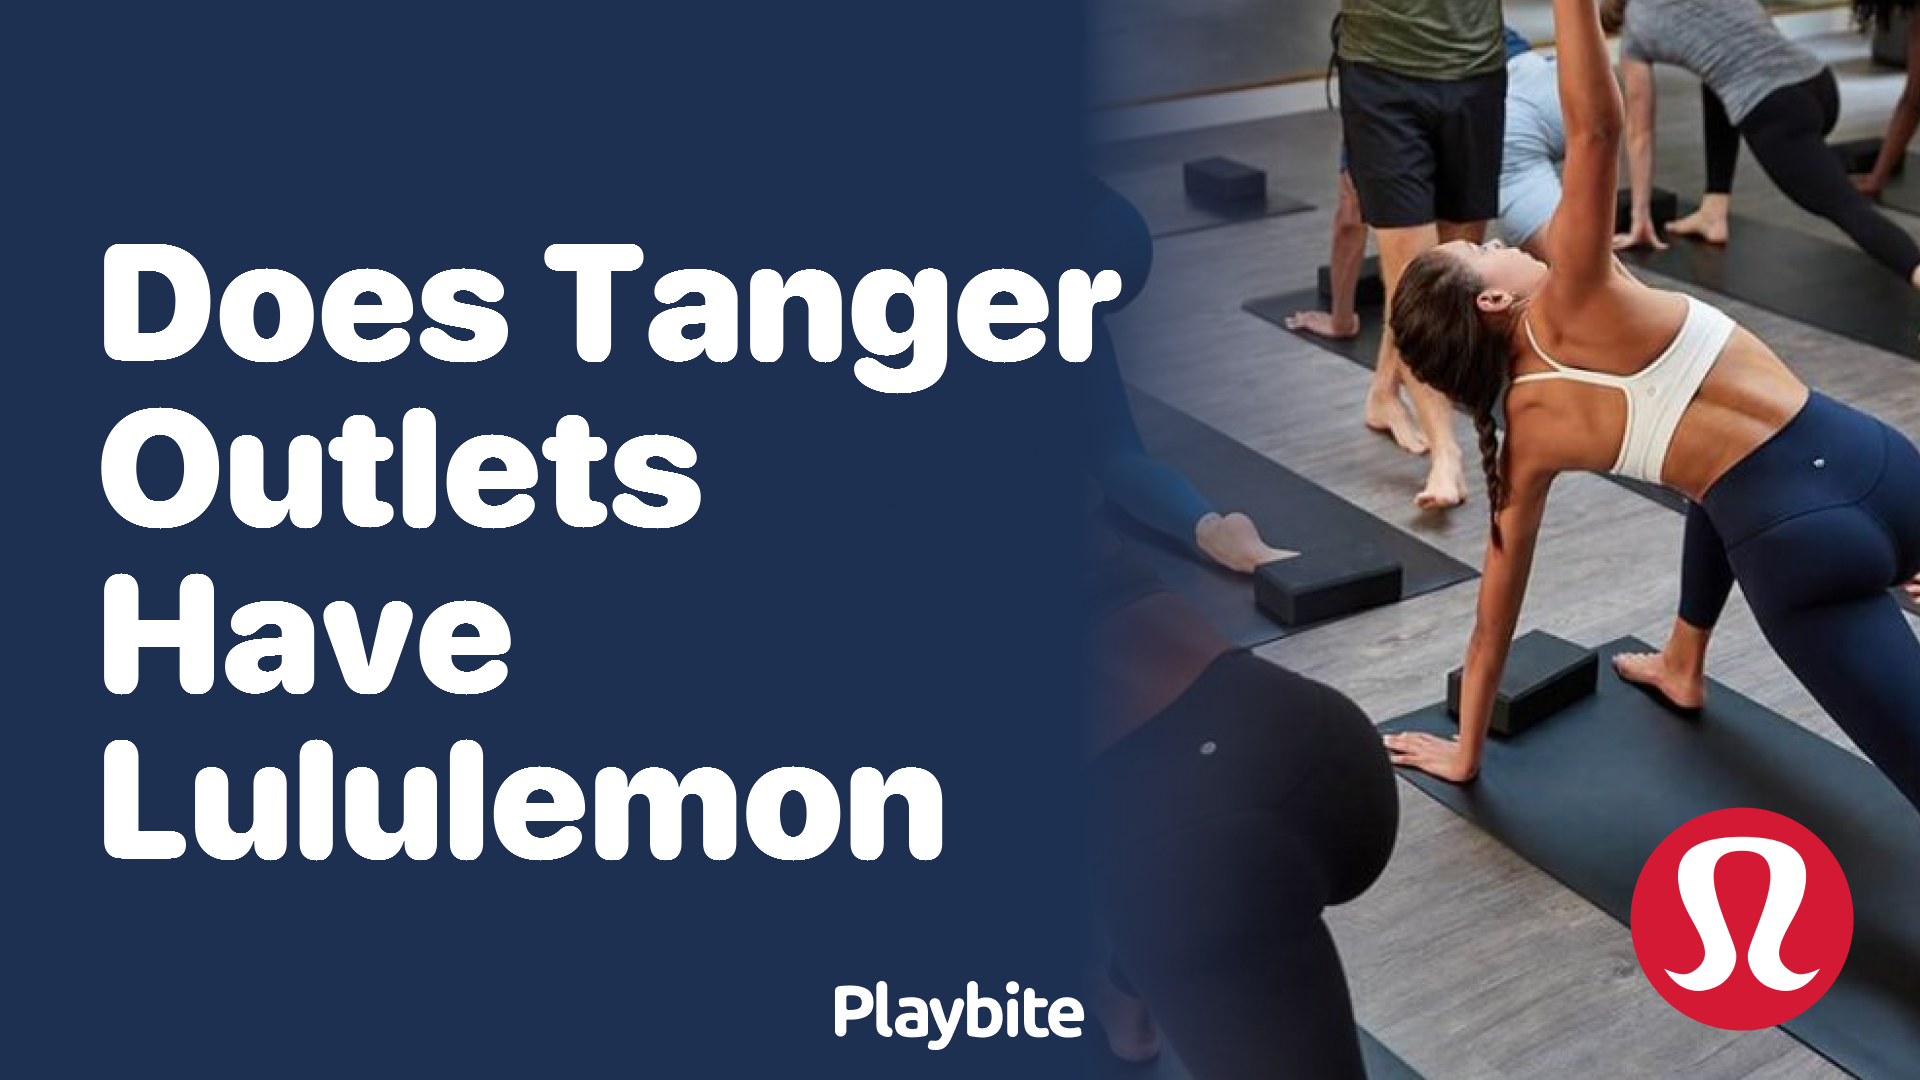 Tanger Outlets - Lululemon is now open at Tanger Fort